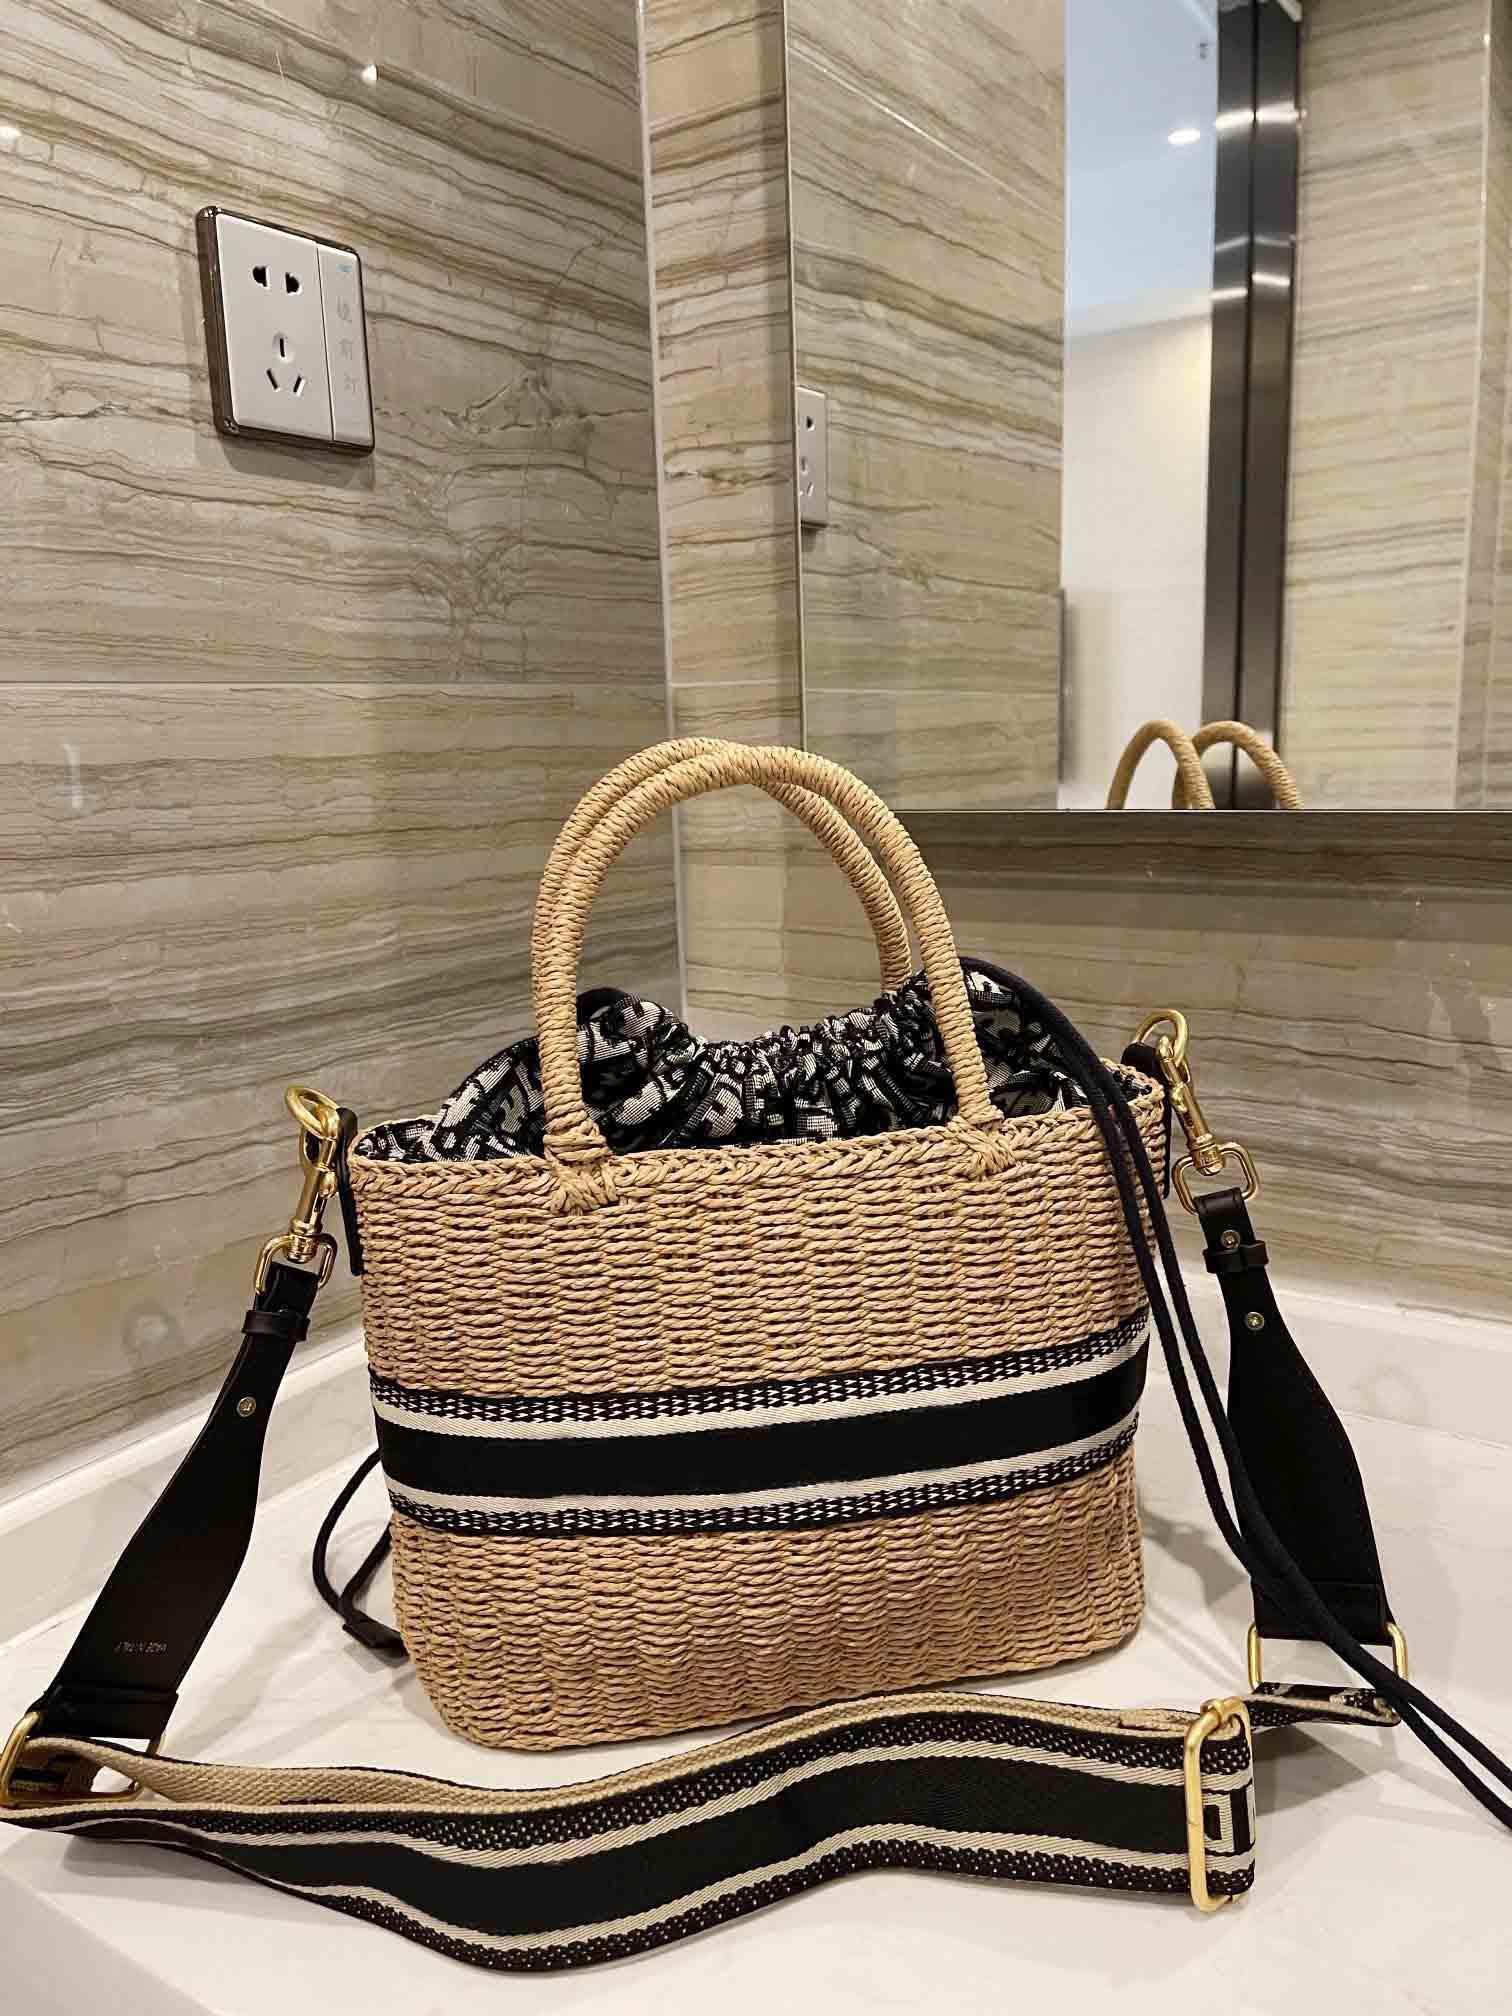 

Women Designers Tote Bag Luxurys Crossbody Hanbags Wickers Hand-woven Knitting Straw Fashion 2021 WICKER Basket Bags High Quality Wholesale, Box(not sold separately)